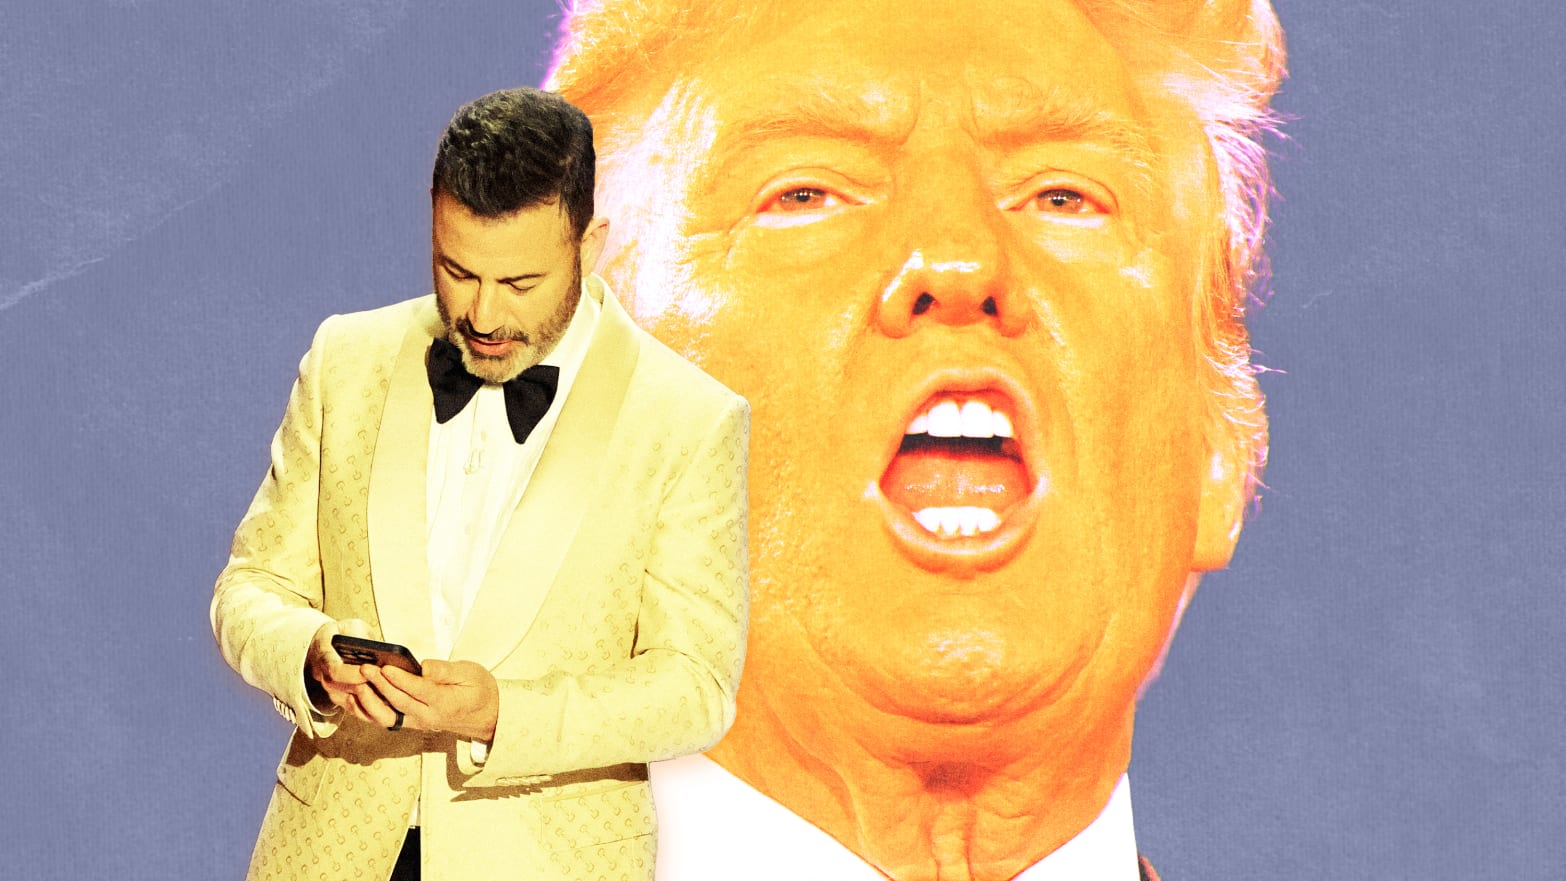 A photo illustration of Jimmy Kimmel and Donald Trump.